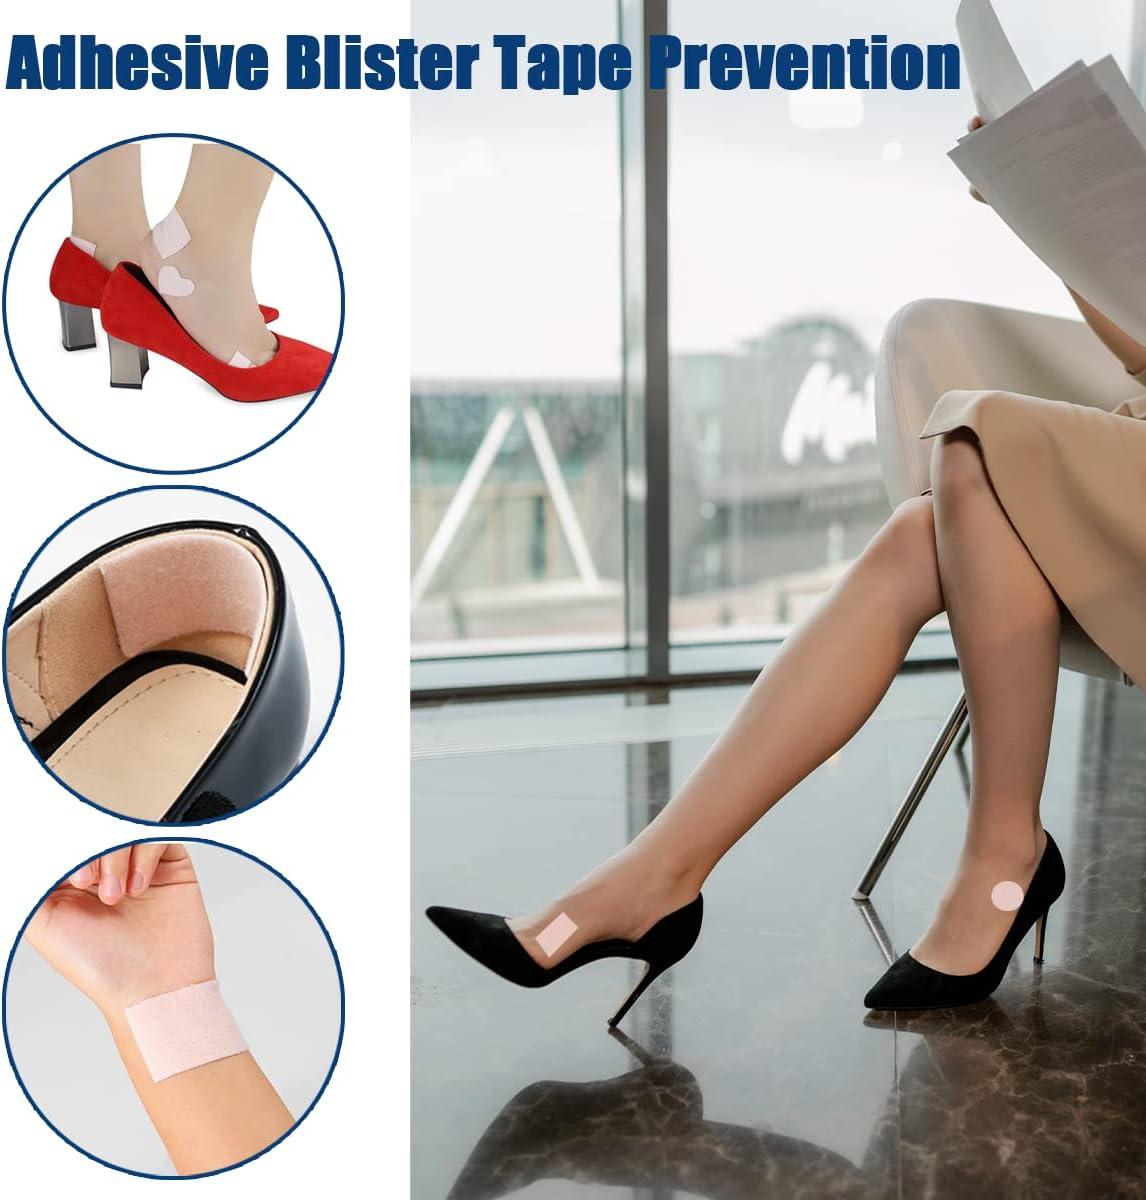 8 Of The Best Products To Prevent Blisters From Shoes, Heels And Sandals |  HuffPost Life